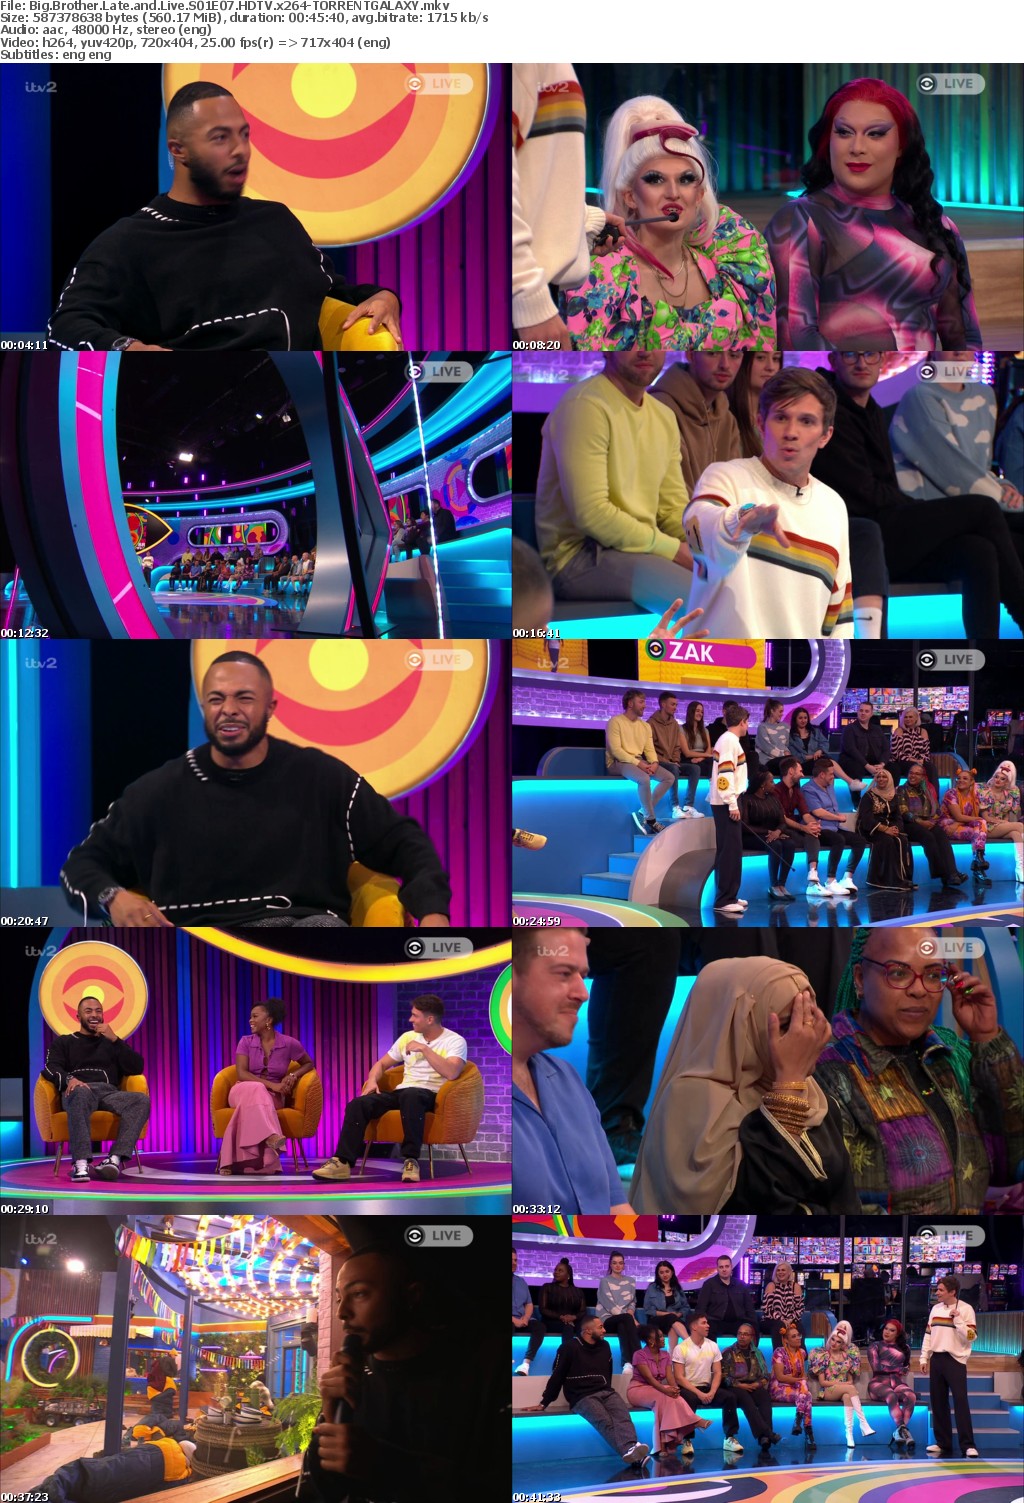 Big Brother Late and Live S01E07 HDTV x264-GALAXY